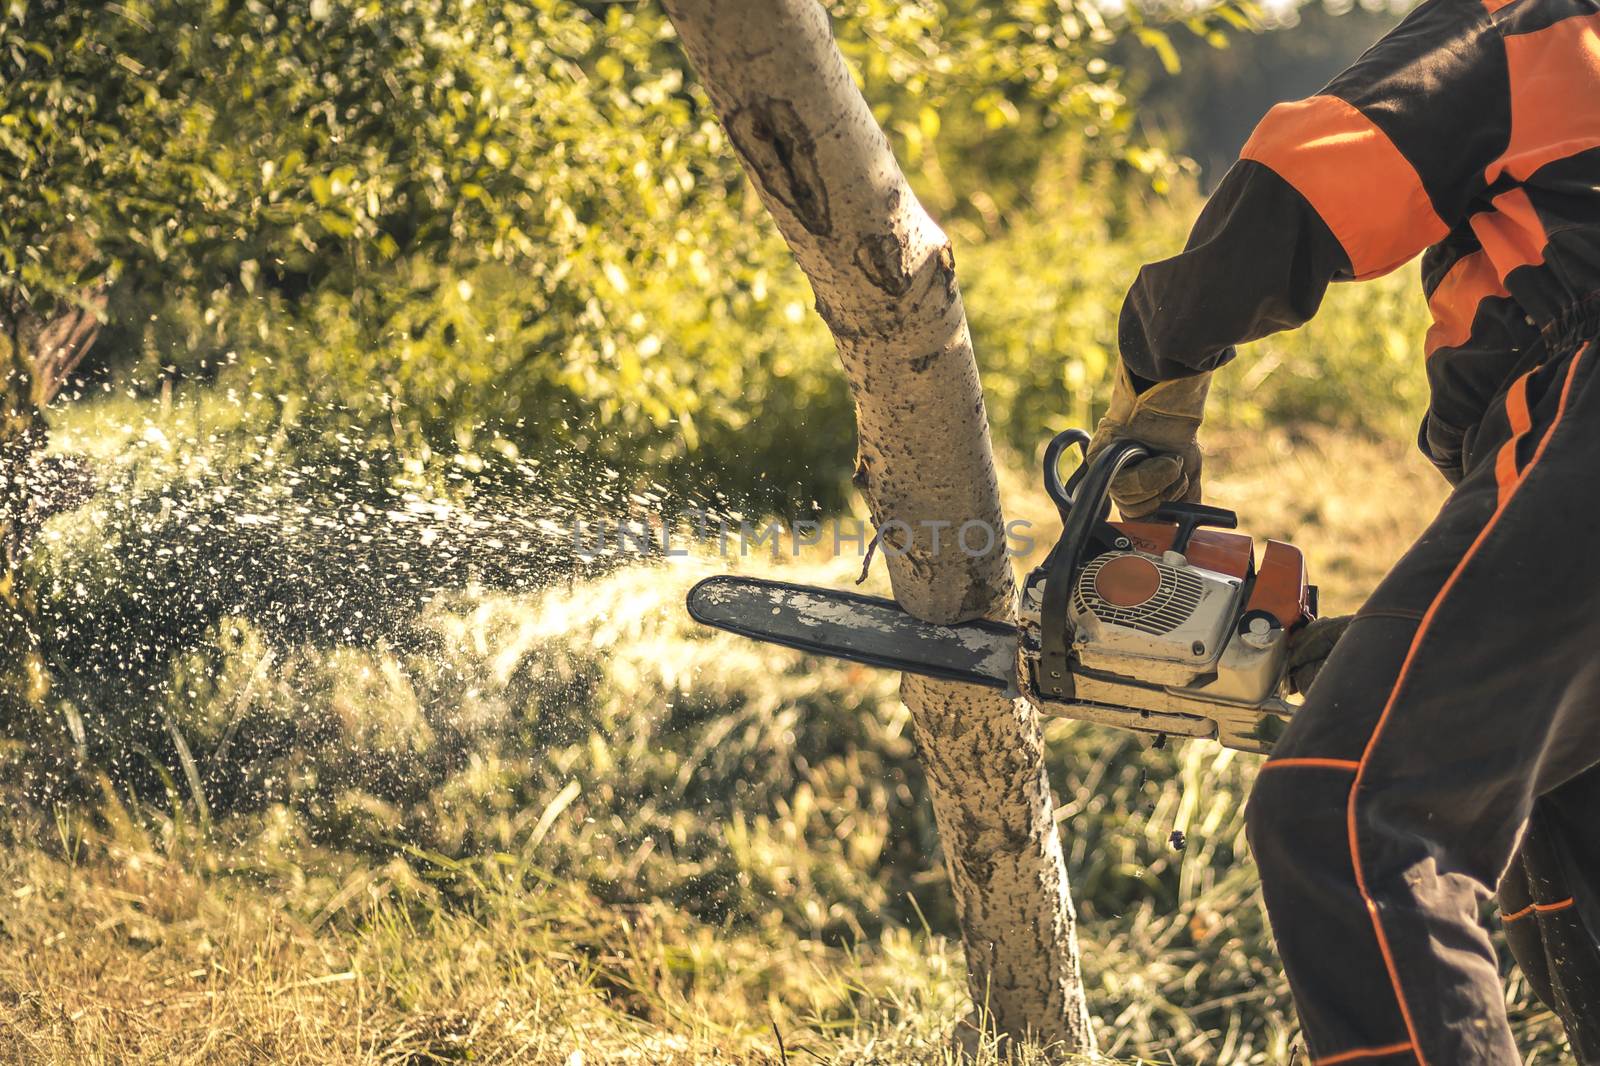 Lumberjack cutting tree with a chainsaw in summer.